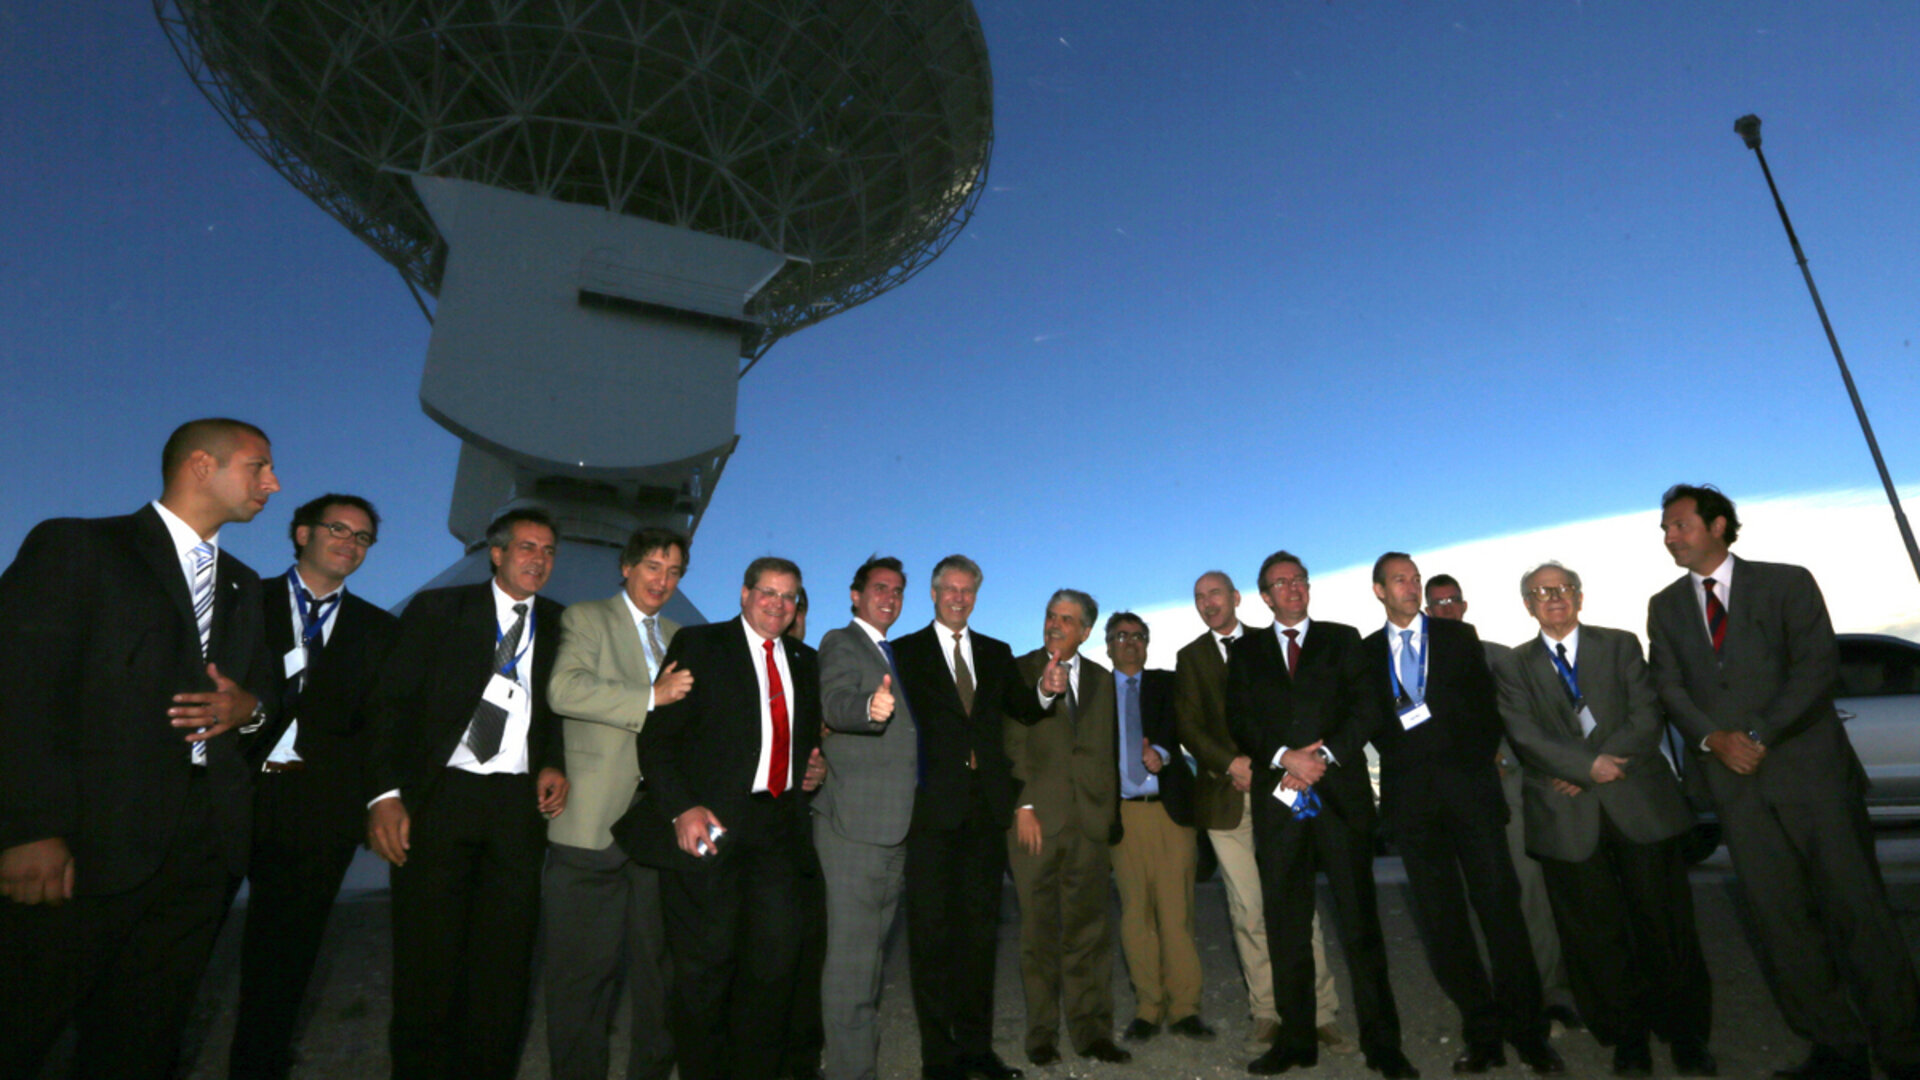 ESA and Argentinian guests gather for Malargüe inauguration